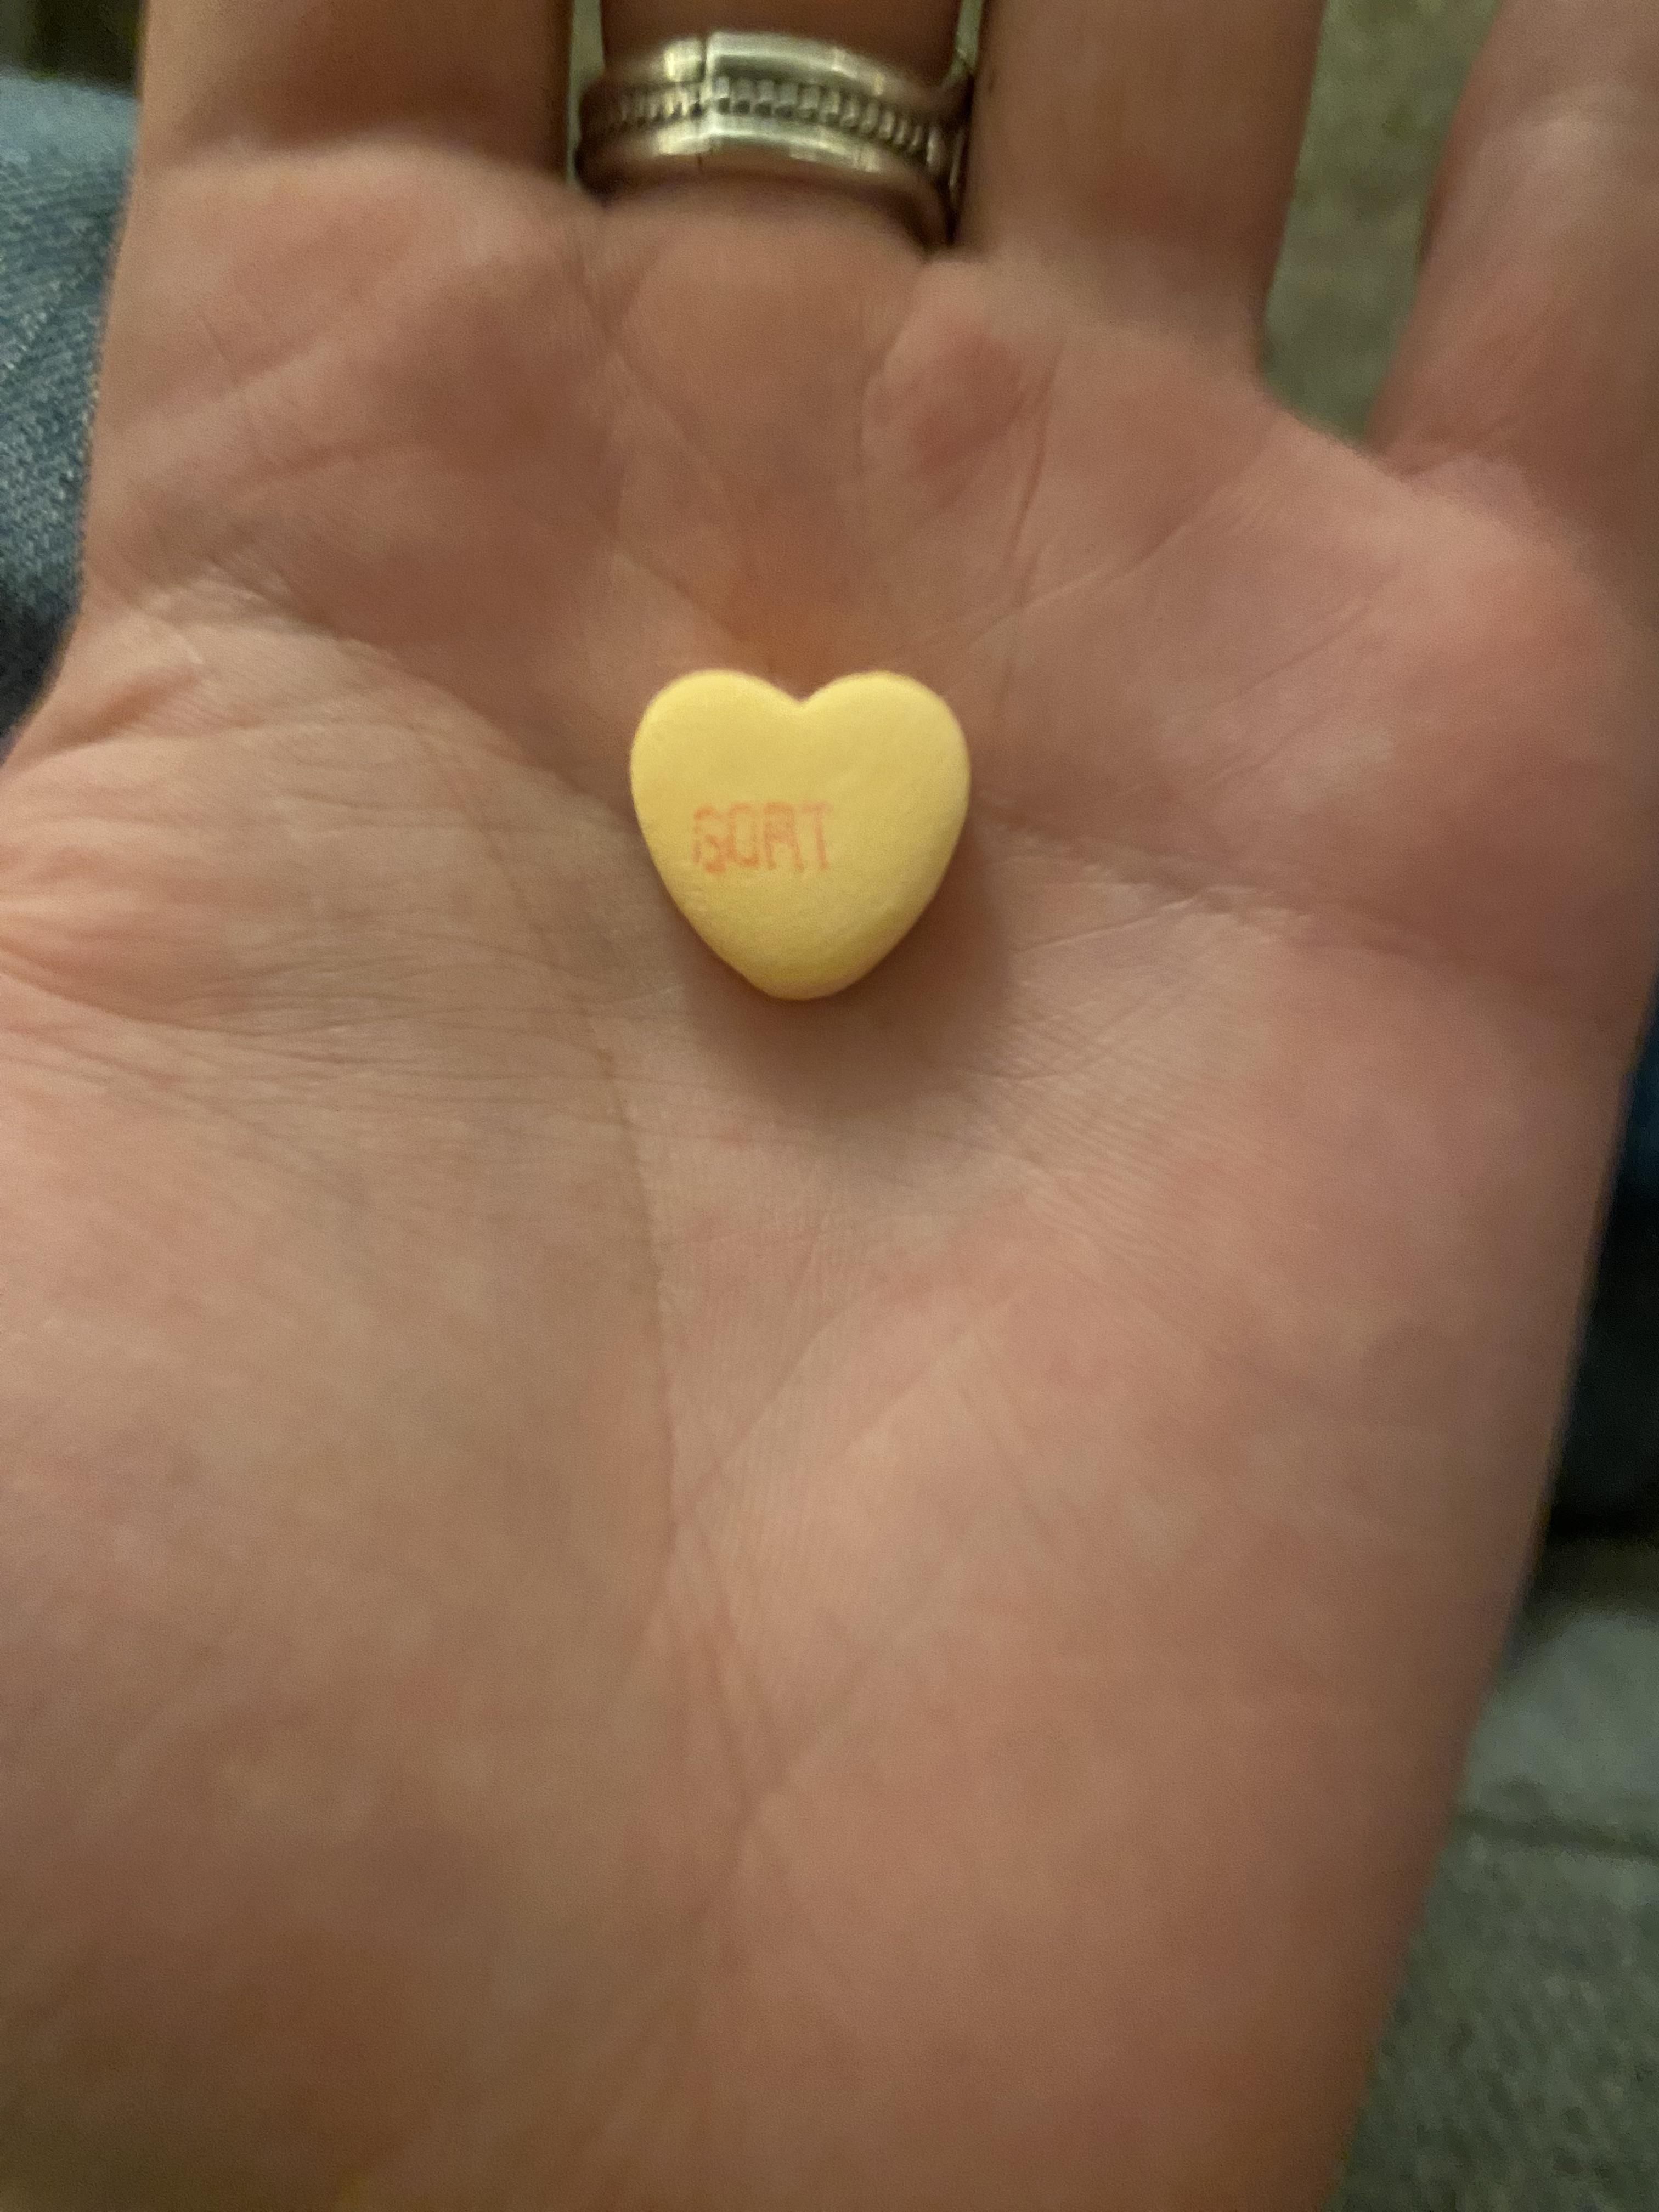 My valentines heart candy says “Gort”